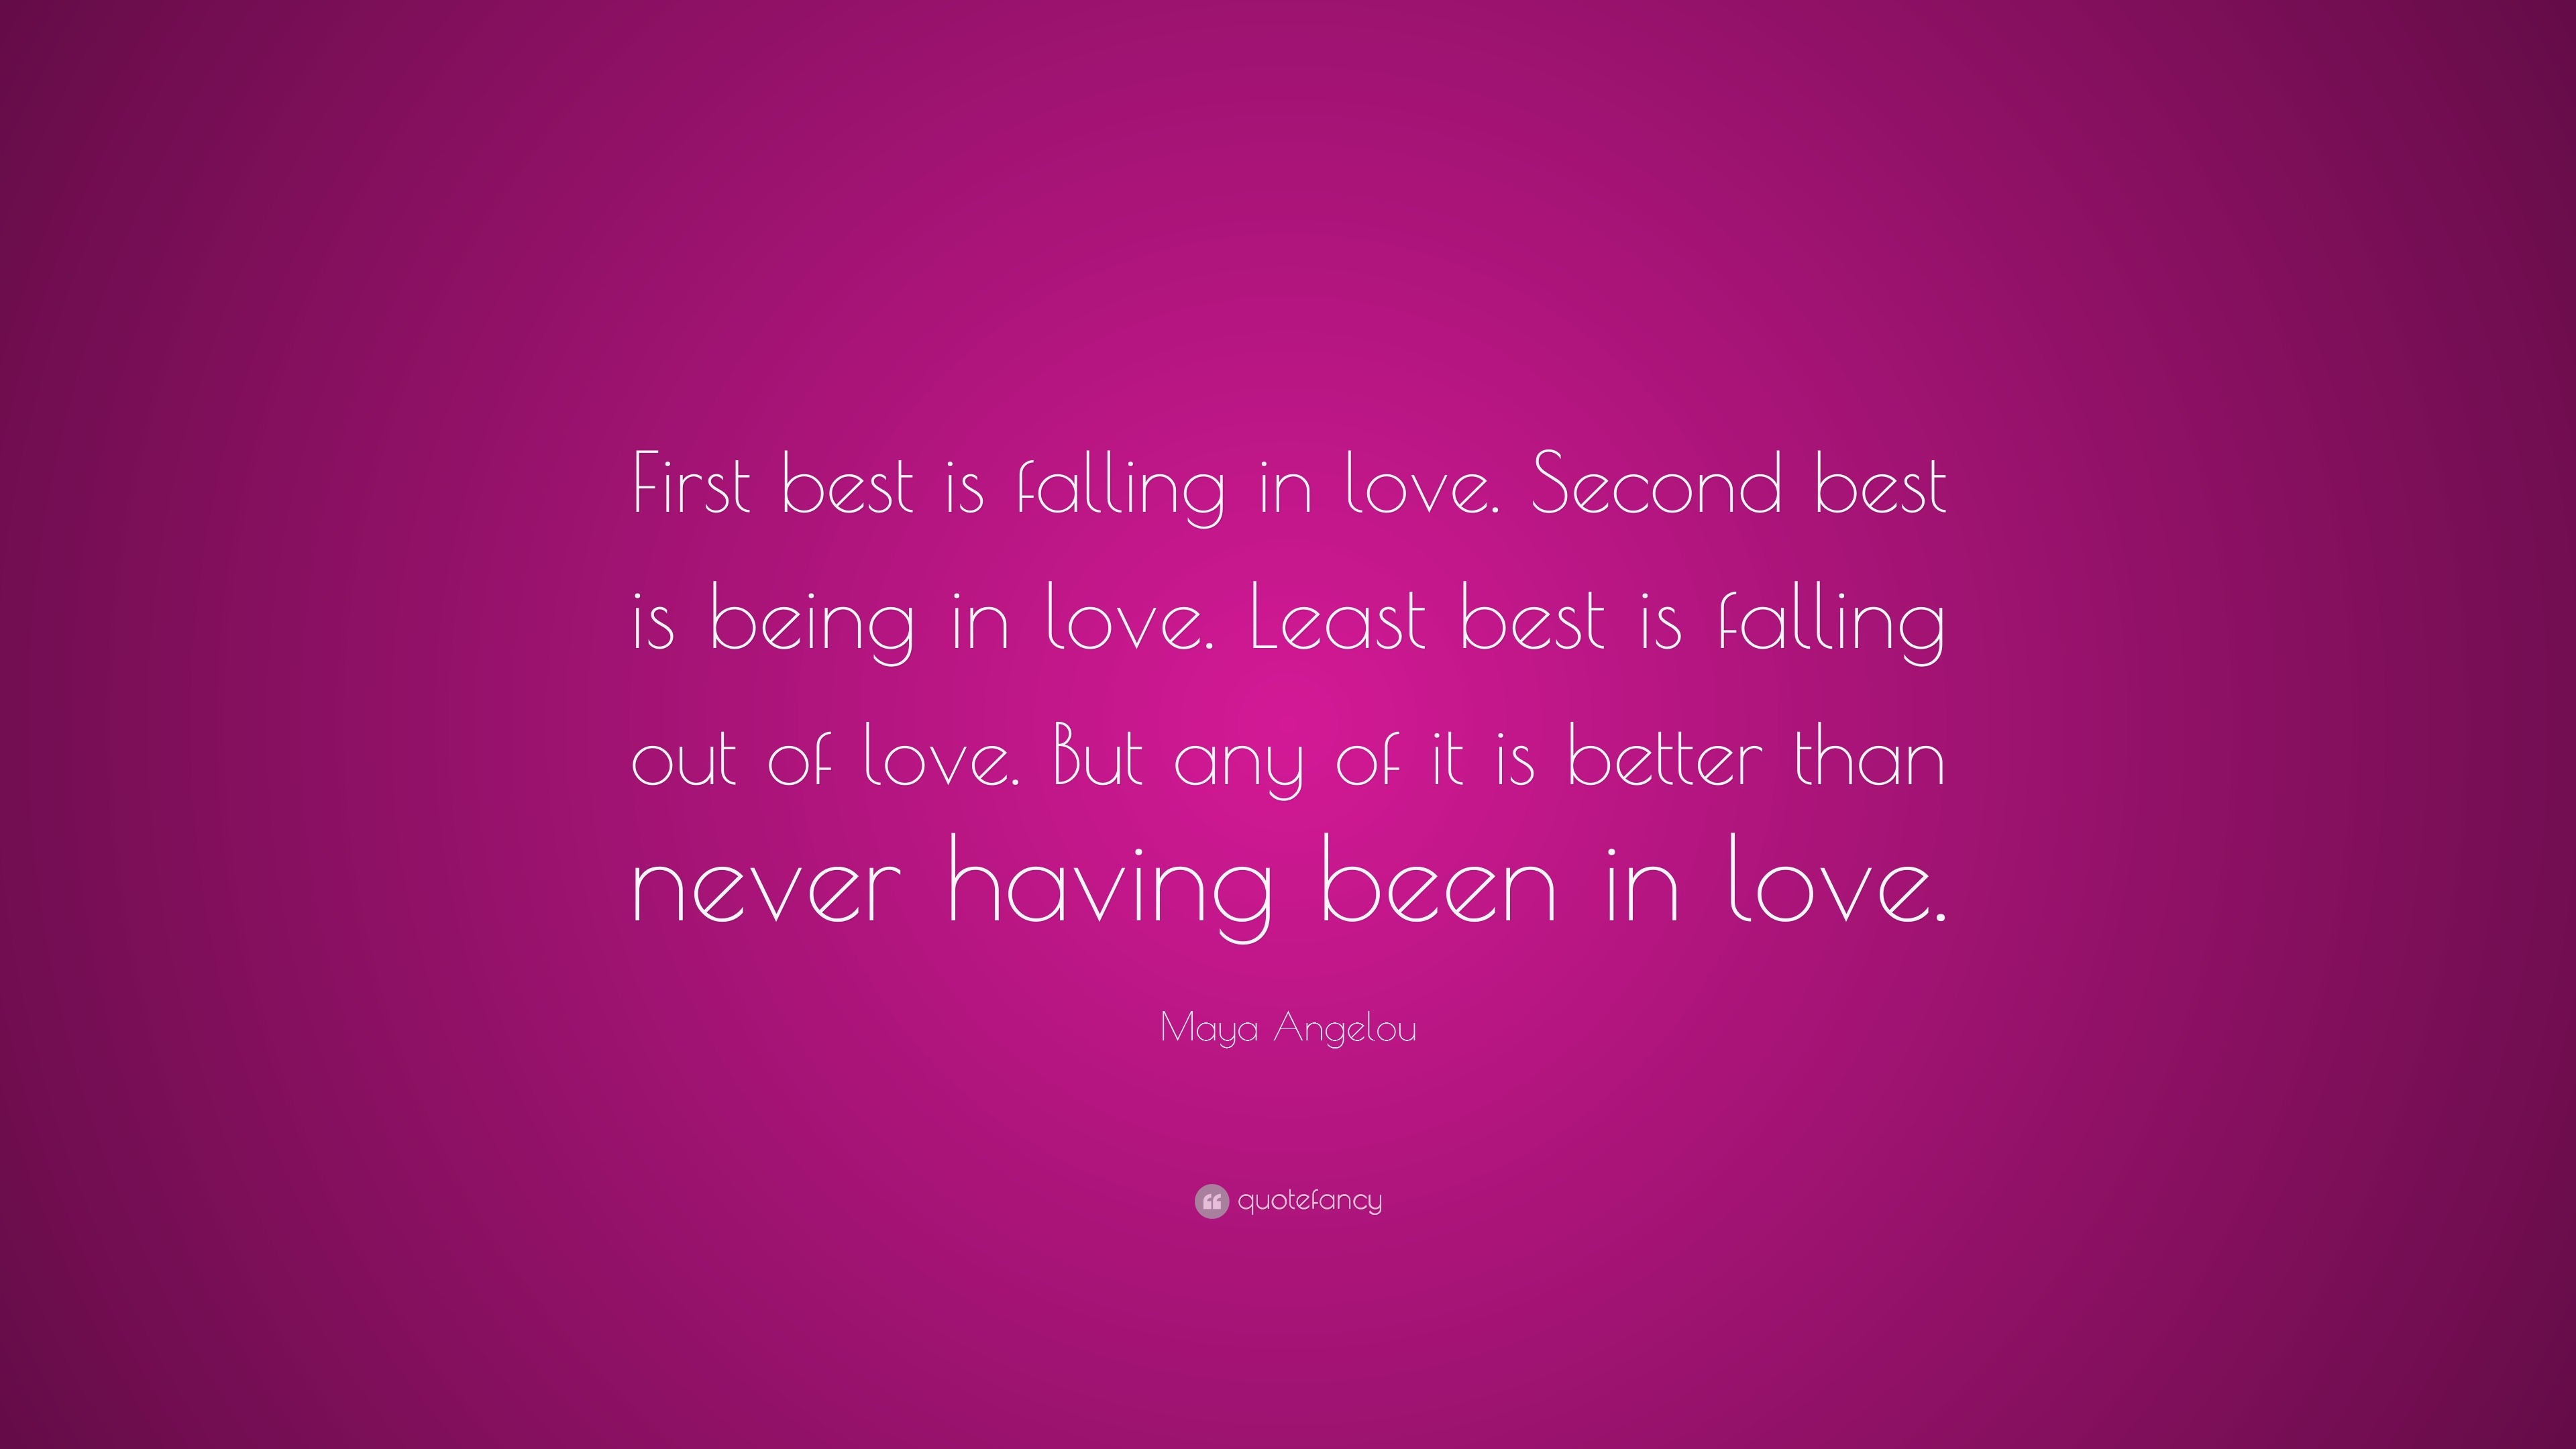 Maya Angelou Quote First Best Is Falling In Love Second Best Is Being In Love Least Best Is Falling Out Of Love But Any Of It Is Better